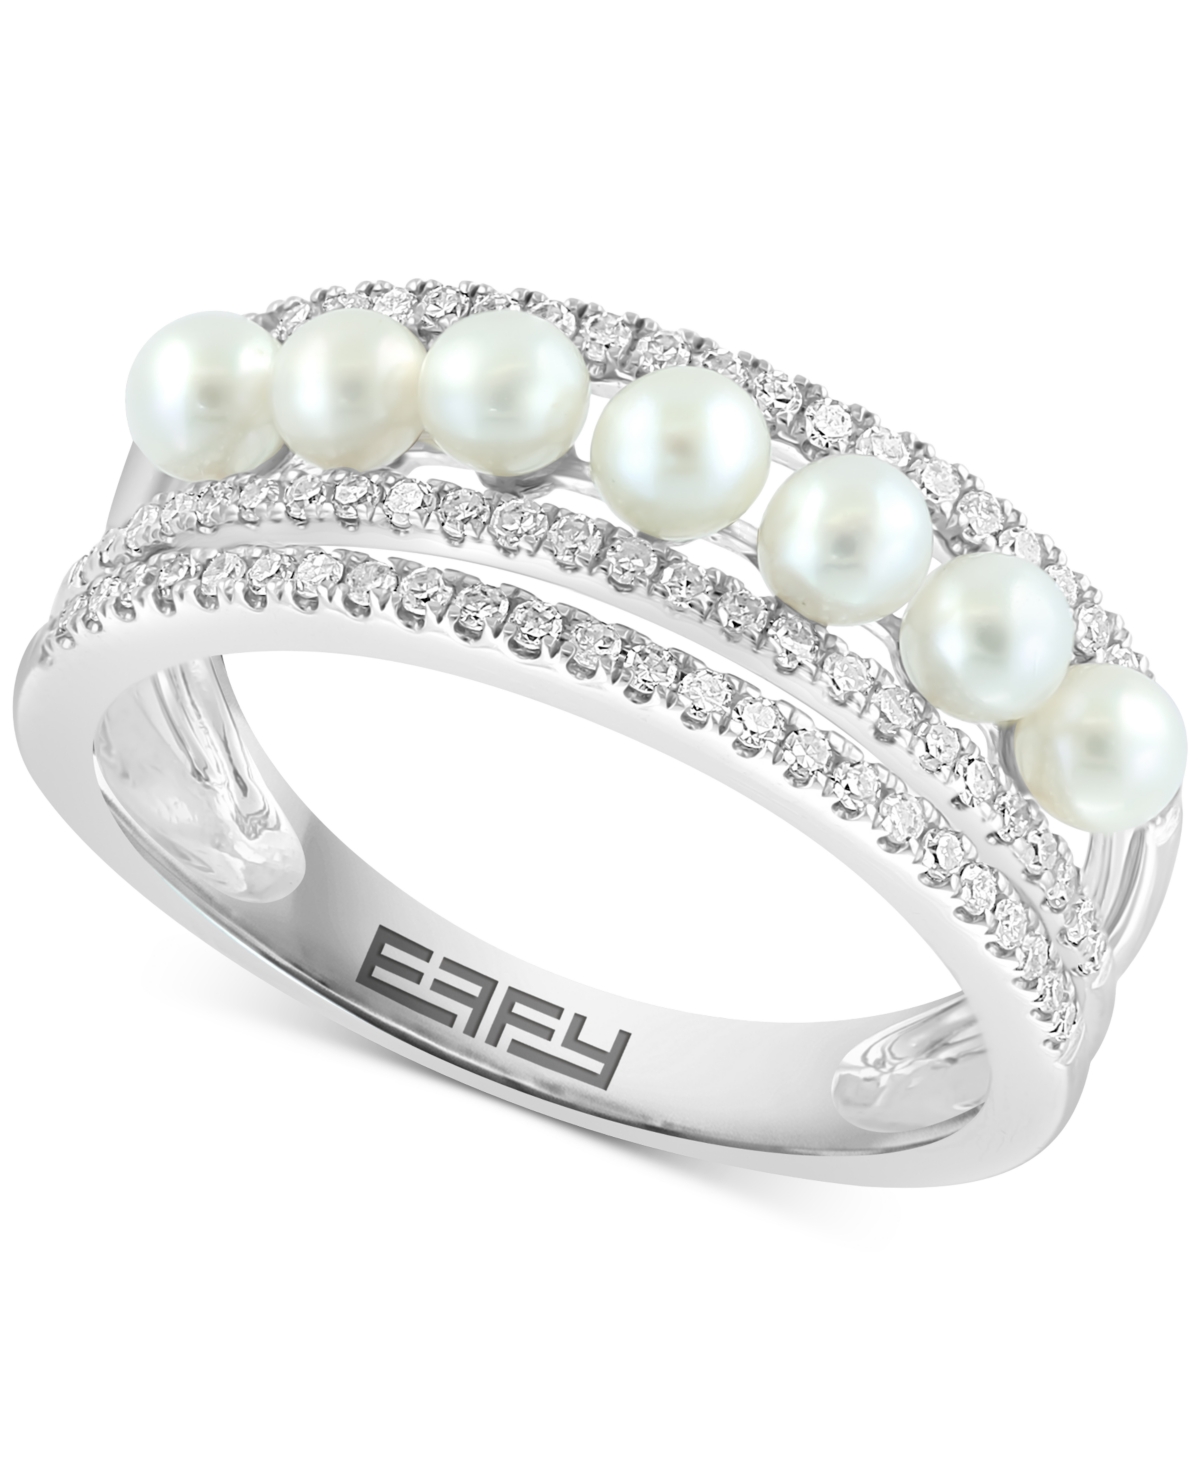 Effy Collection Effy Freshwater Pearl (3mm) & Diamond (1/3 ct. t.w.) Multirow Ring in 14k White Gold